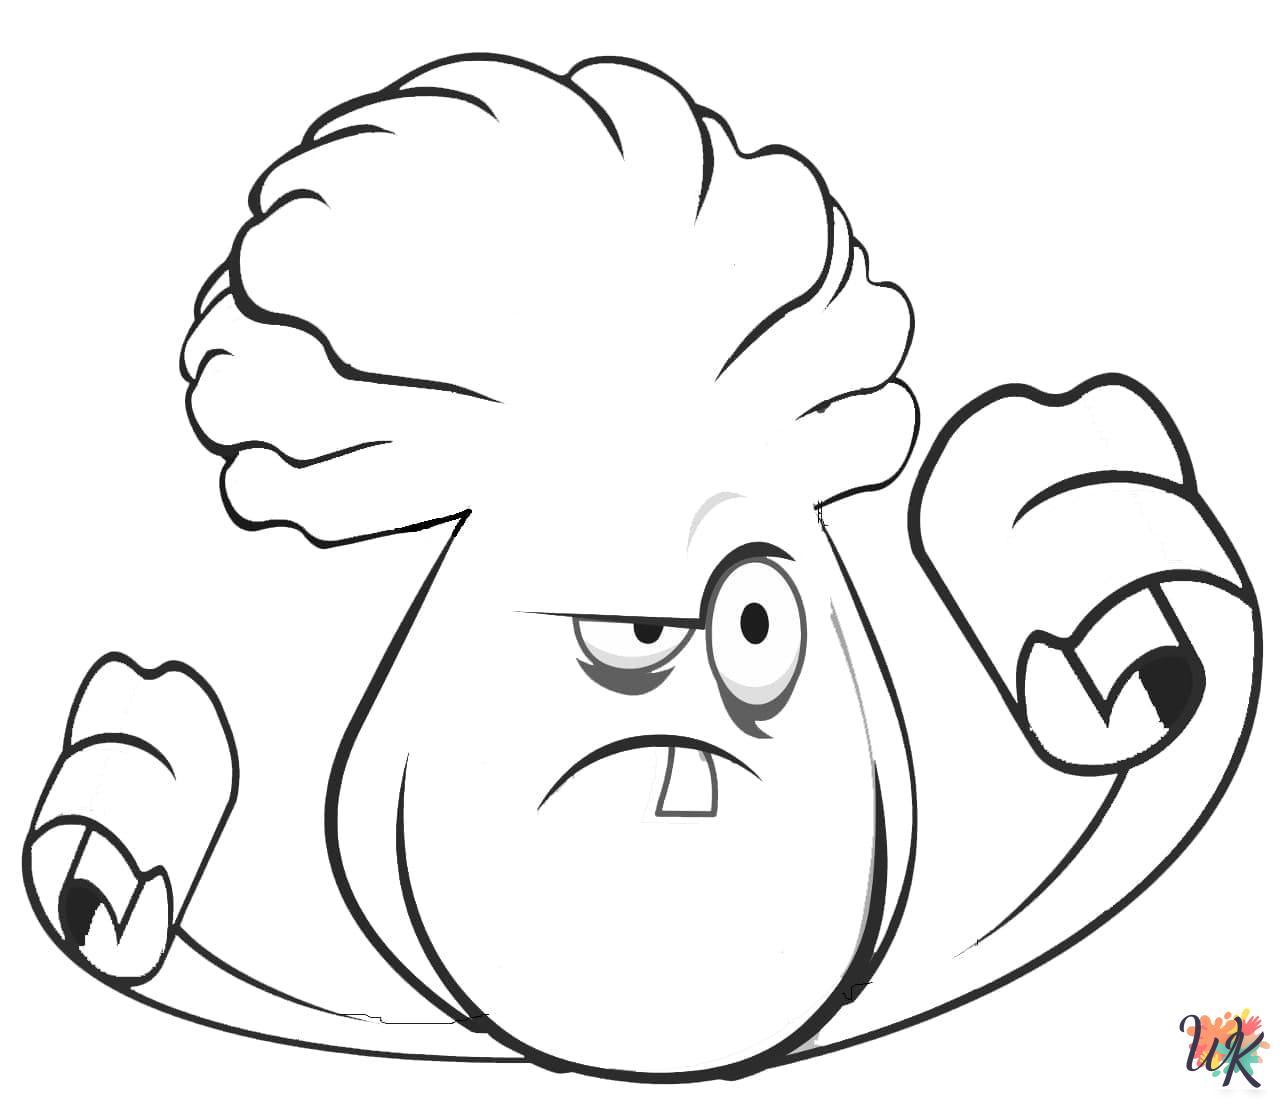 detailed Plants vs. Zombies coloring pages for adults